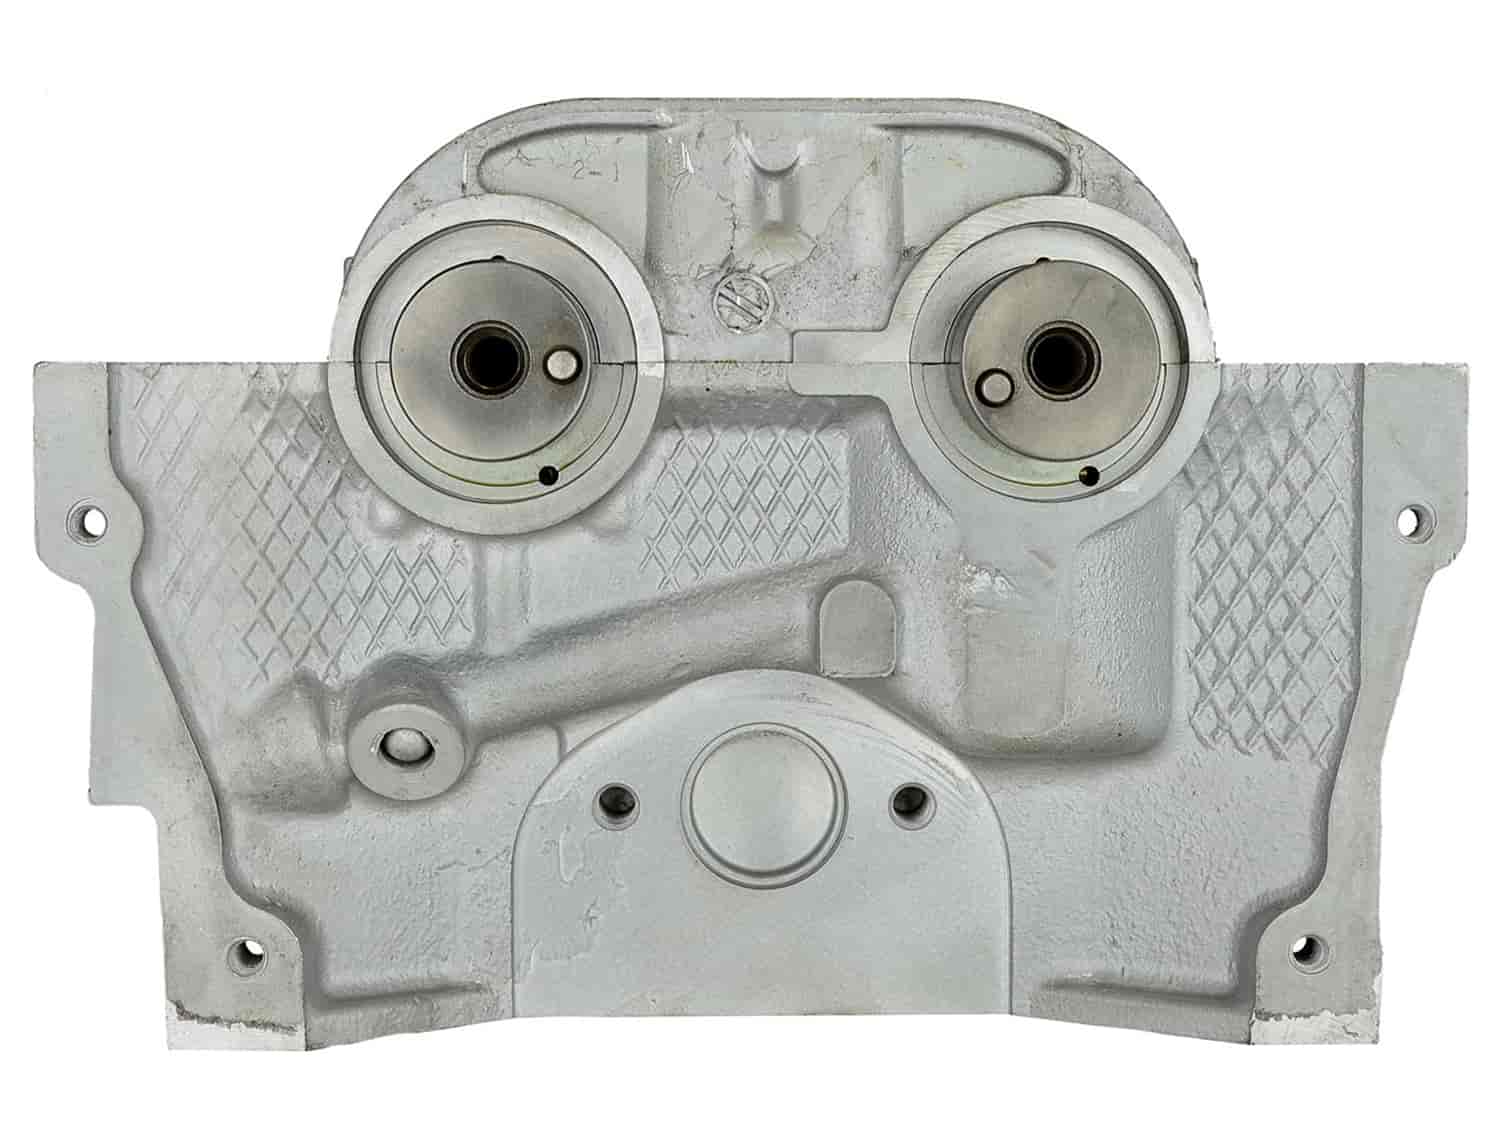 Remanufactured Cylinder Head for 1999-2001 Mazda Protege with